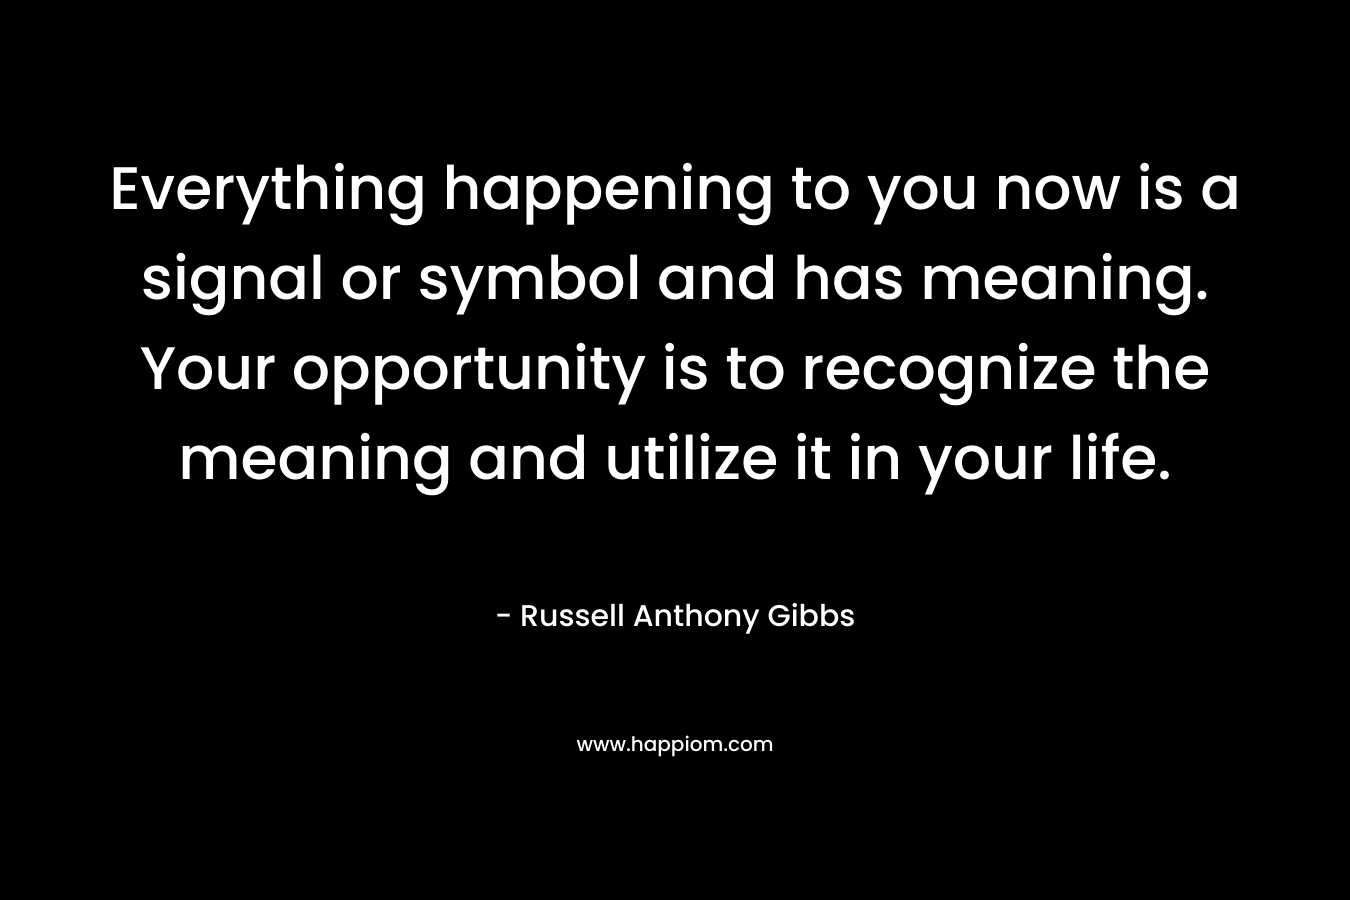 Everything happening to you now is a signal or symbol and has meaning. Your opportunity is to recognize the meaning and utilize it in your life. – Russell Anthony Gibbs